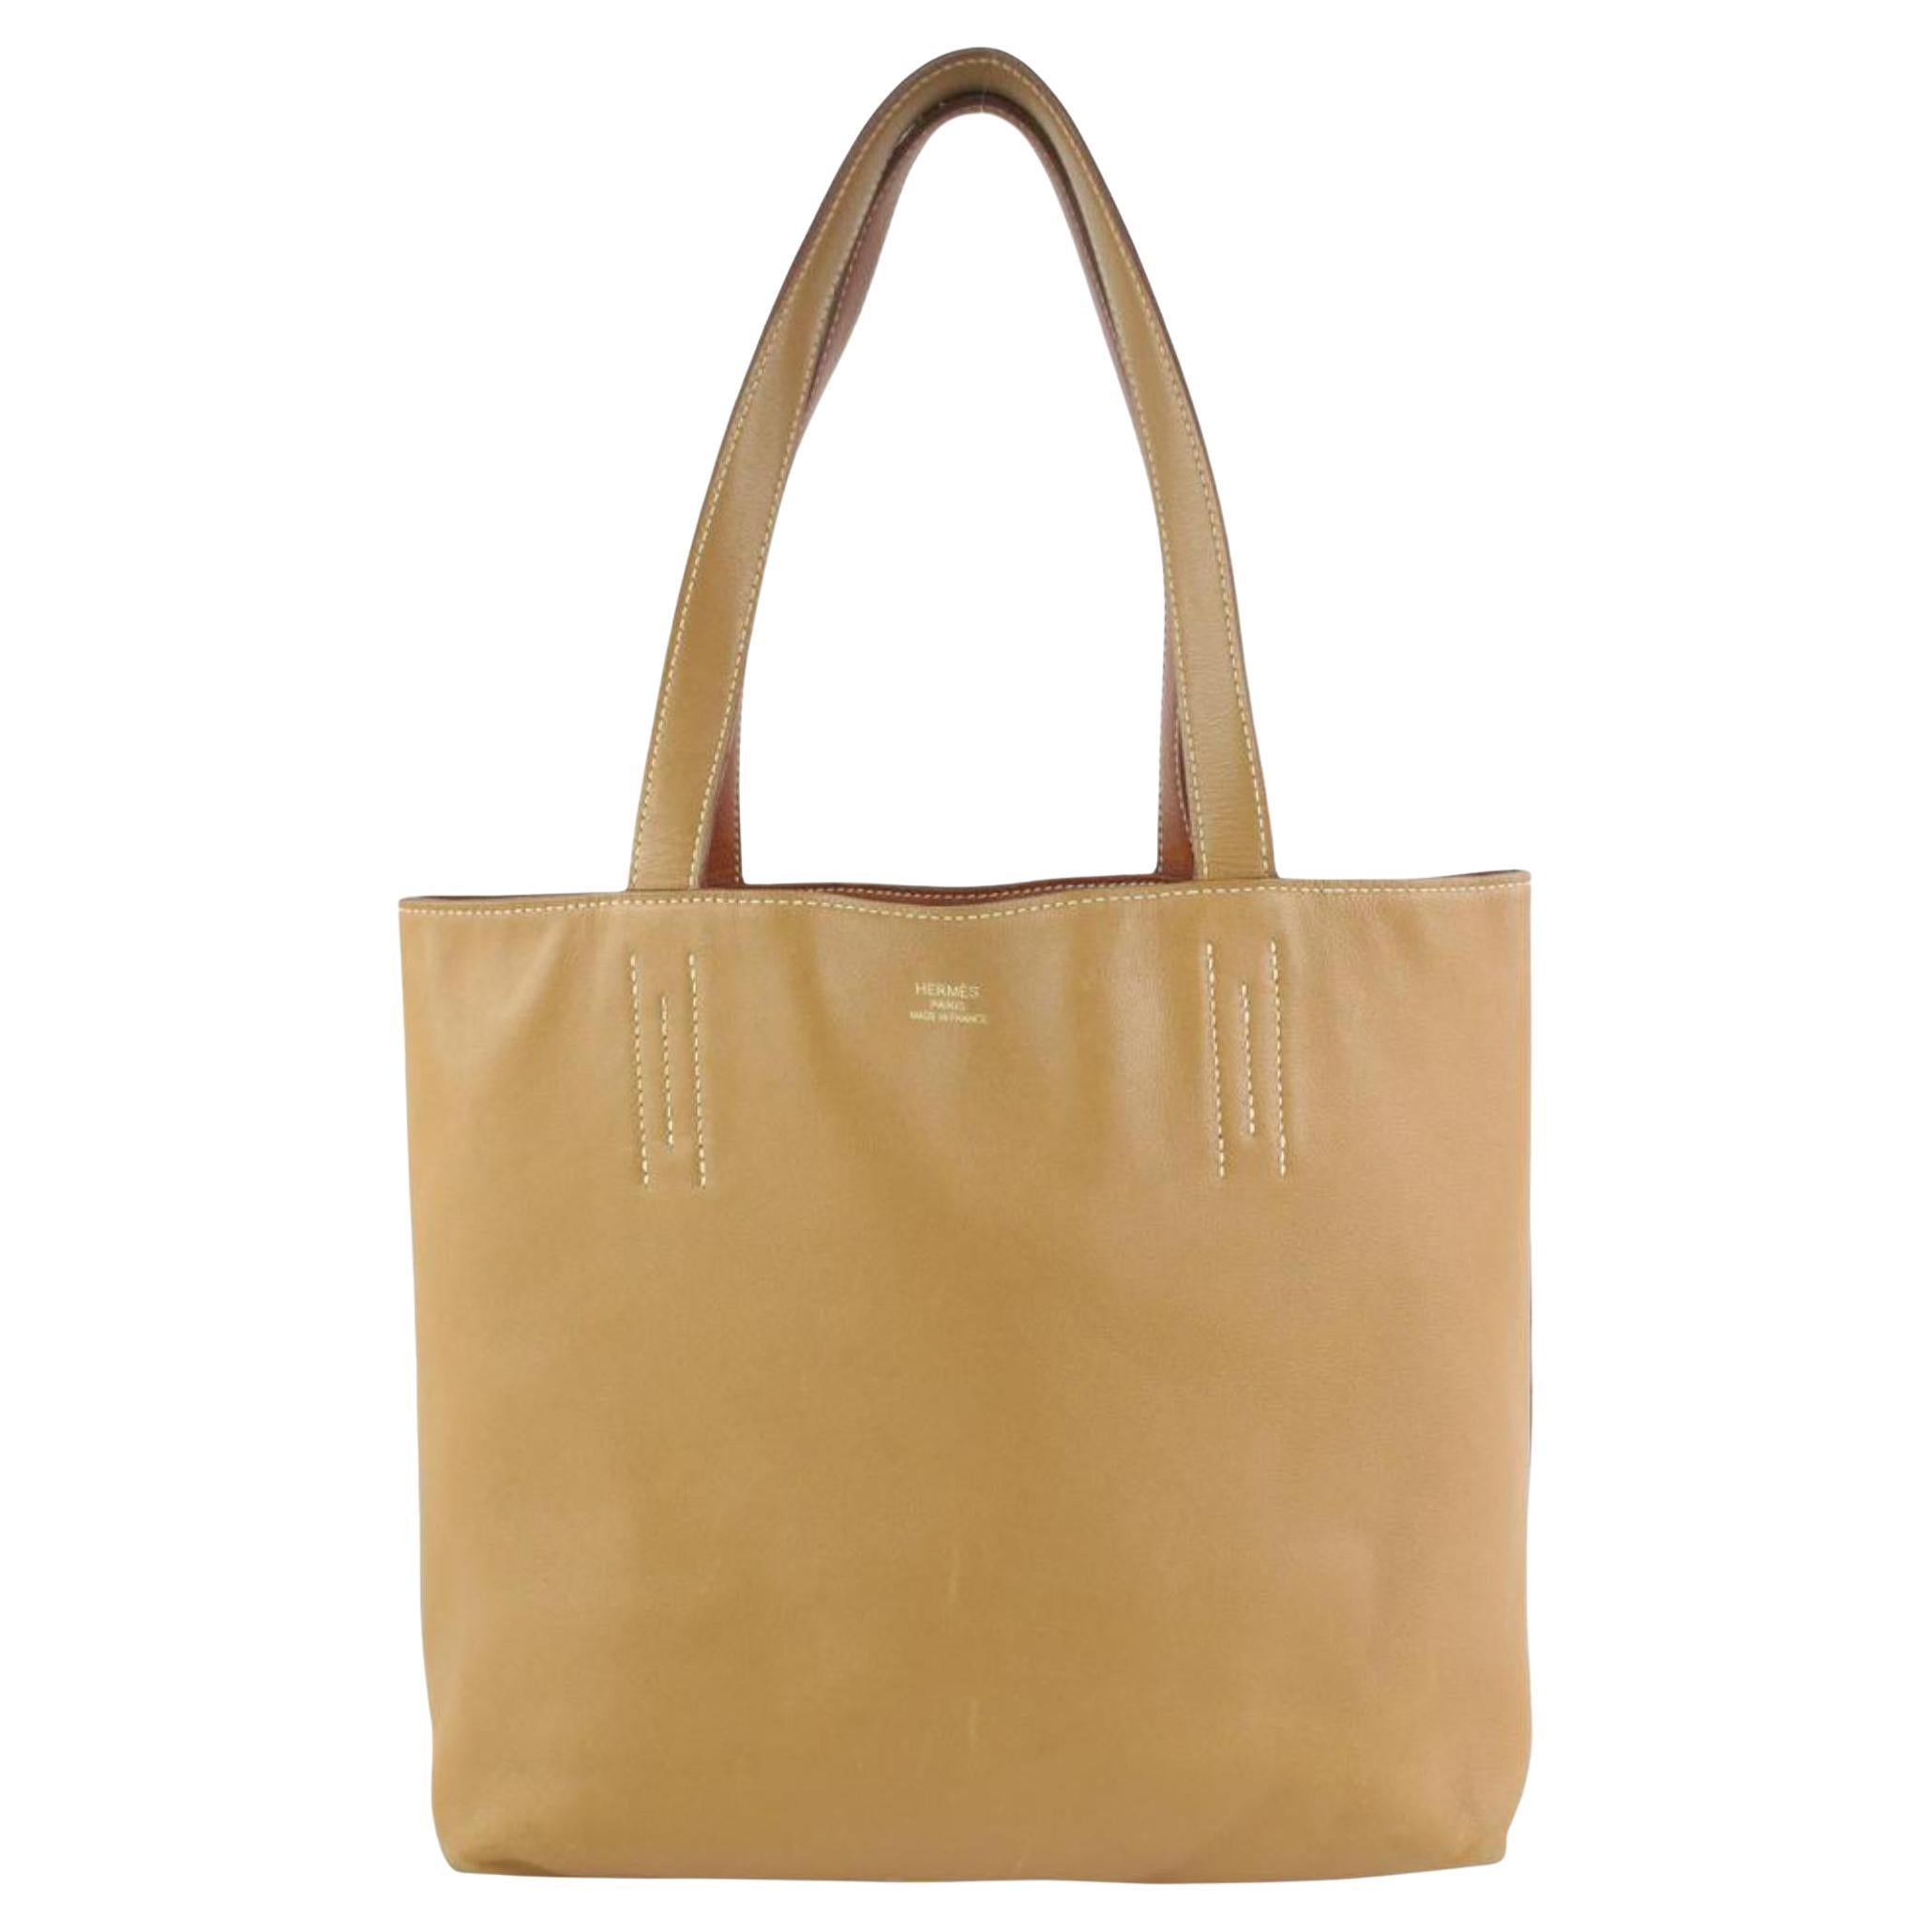 Hermès Brown x Gold Reversible Leather Double Sens 36 cm Tote 1111h43 For Sale